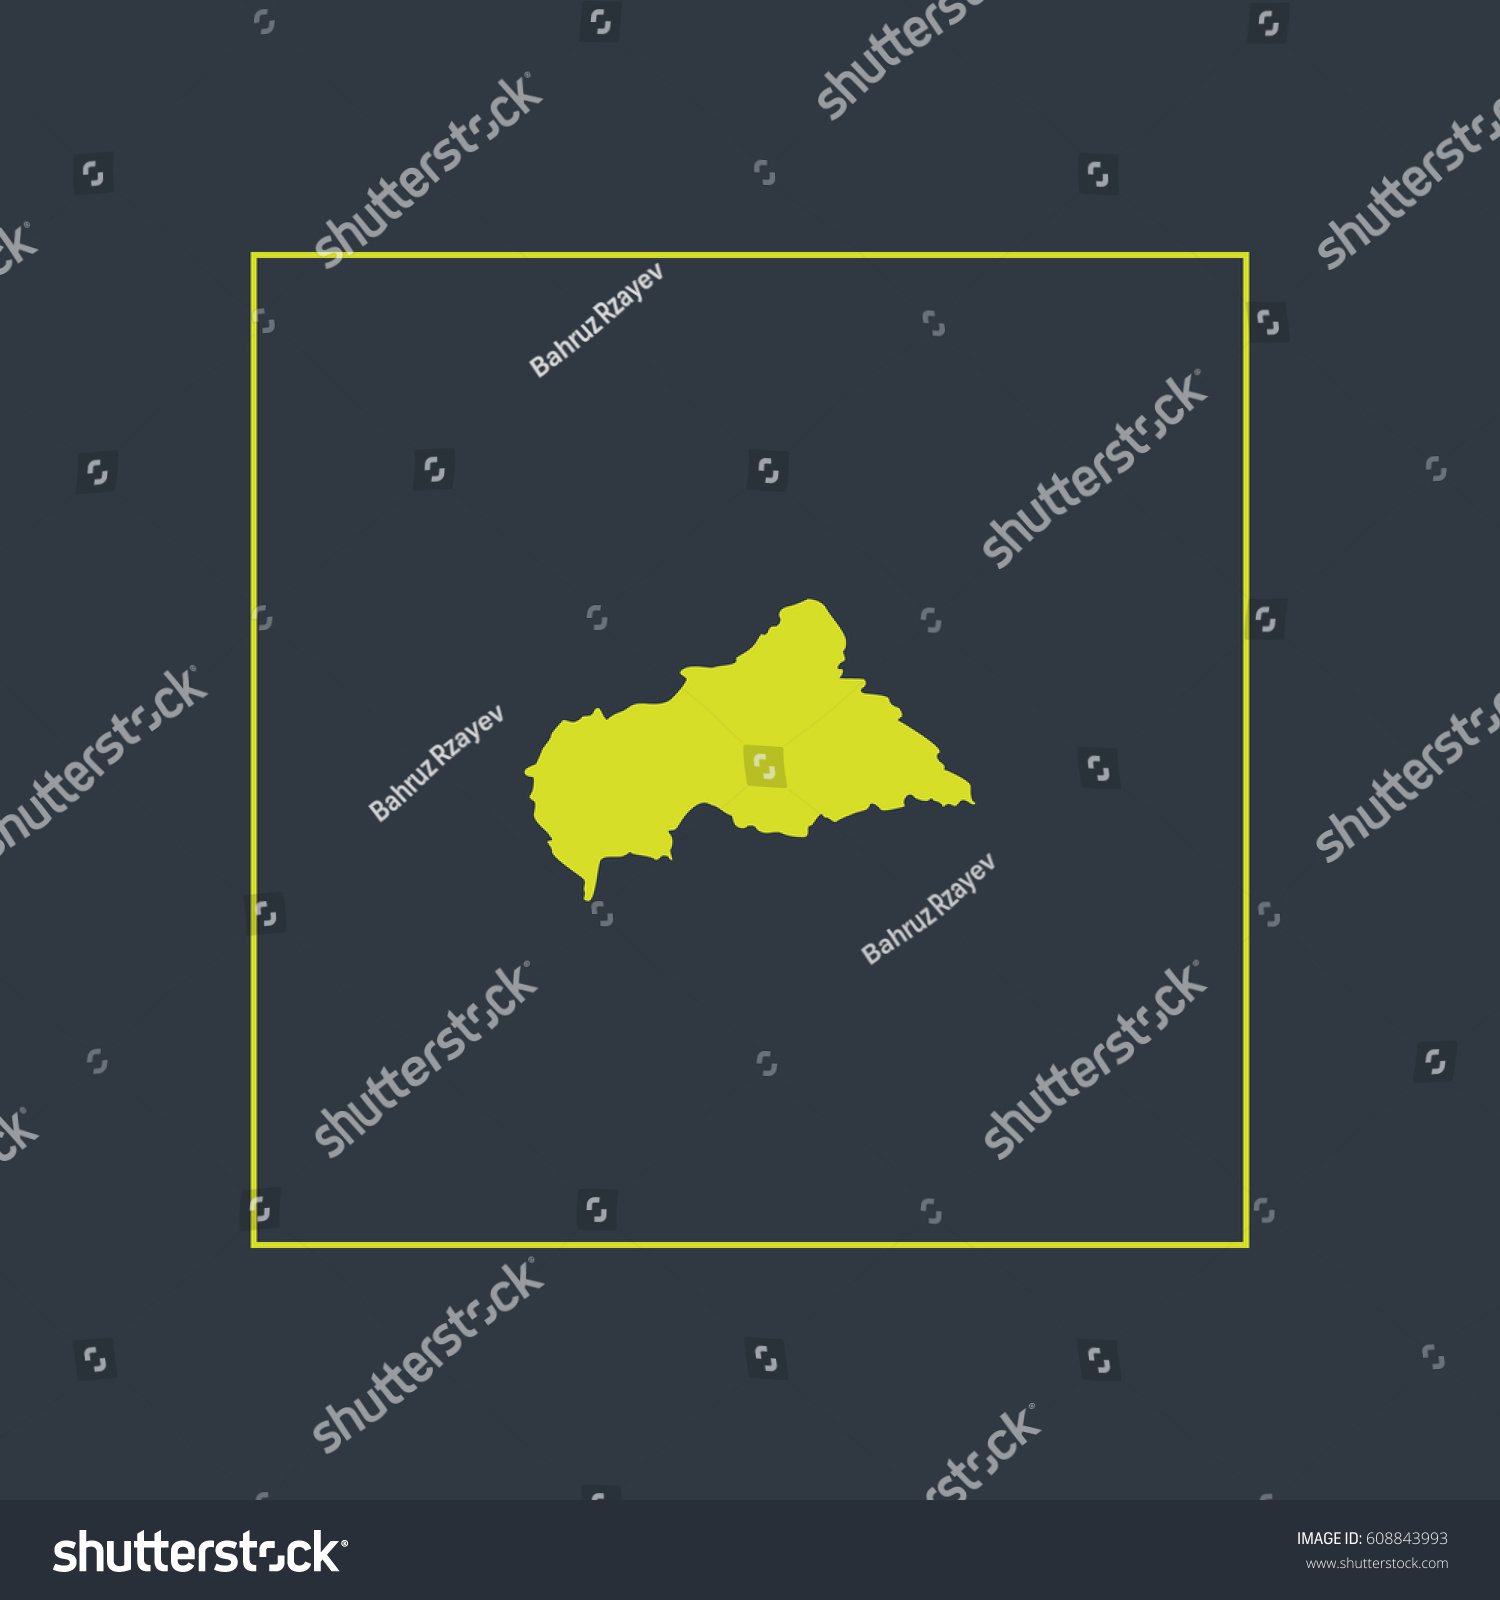 Map Of Central African Republic Vector Royalty Free Stock Vector 608843993 8105